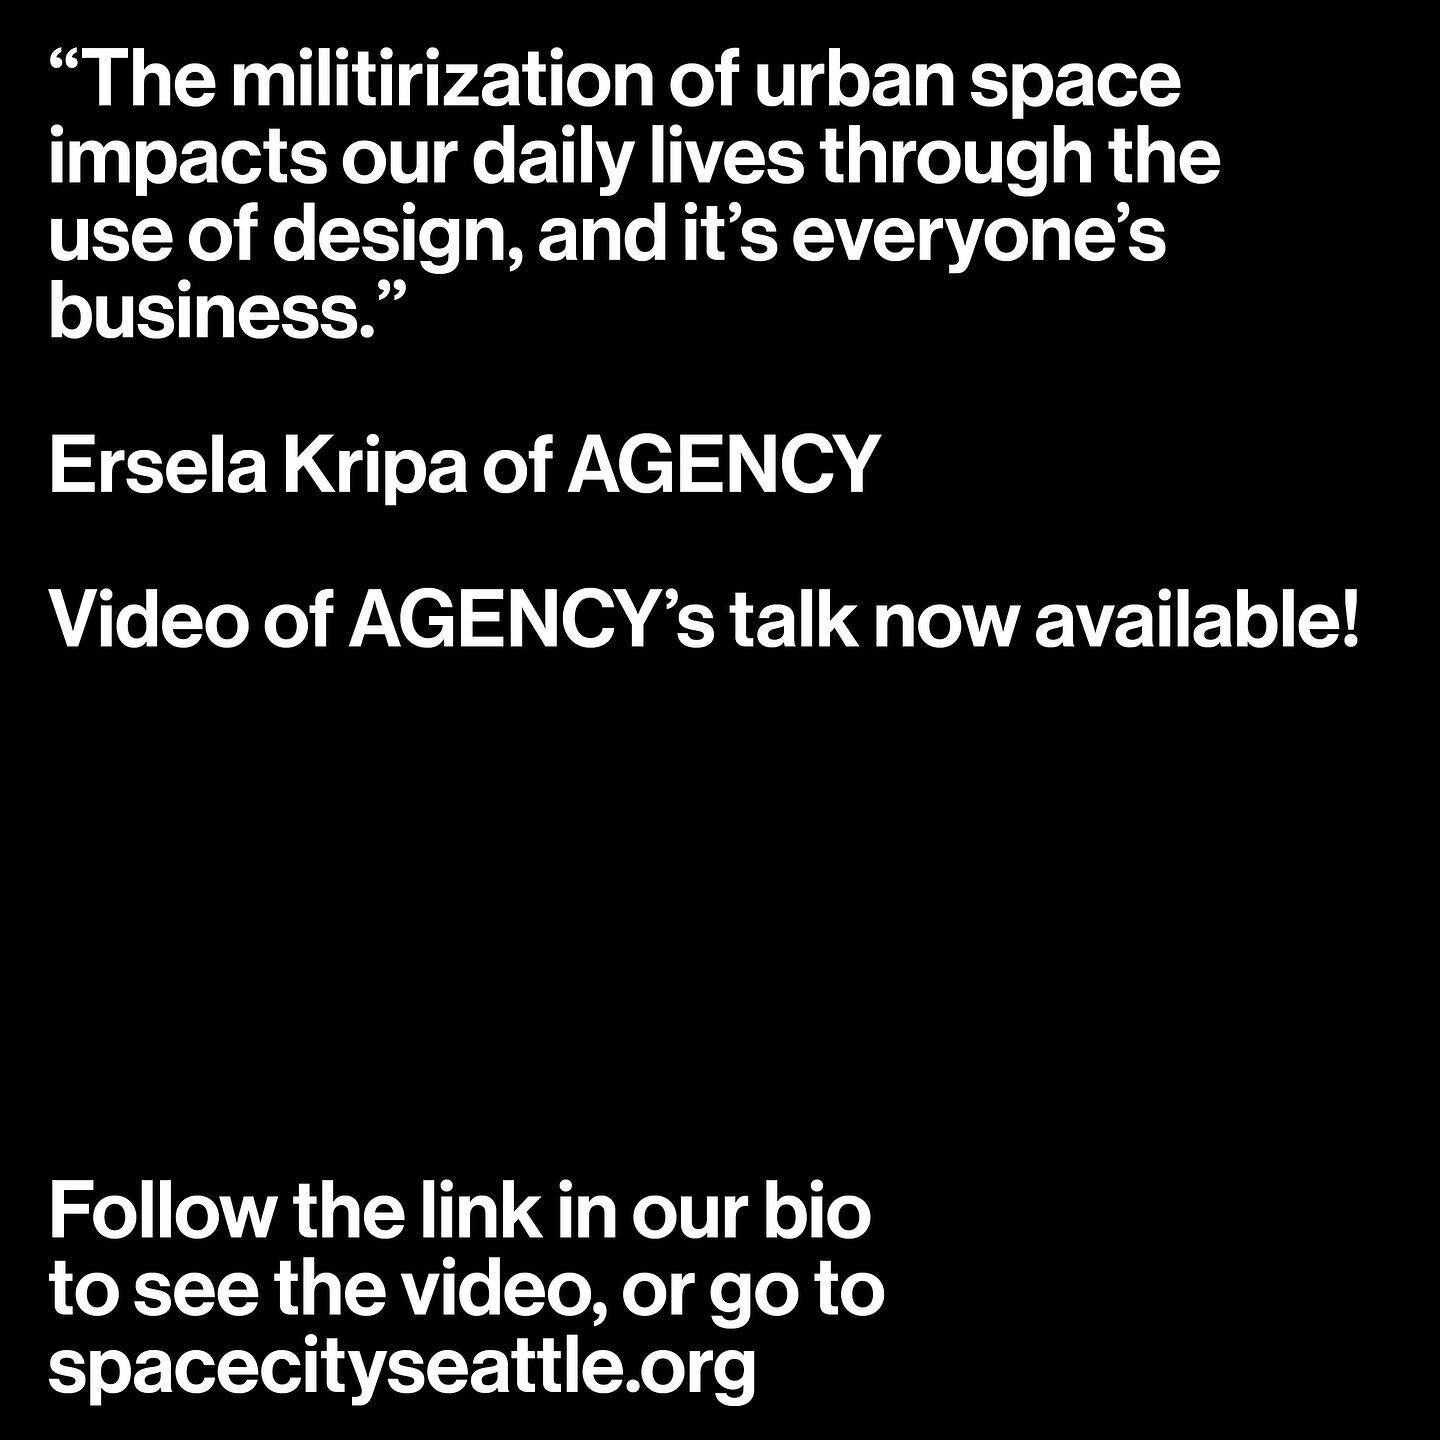 If you didn&rsquo;t have a chance to catch this thought-provoking lecture by Stephen Mueller &amp; Ersela Kripa of AGENCY, take the opportunity to do so now! 

Video now available.

Follow the link in our bio for more information.